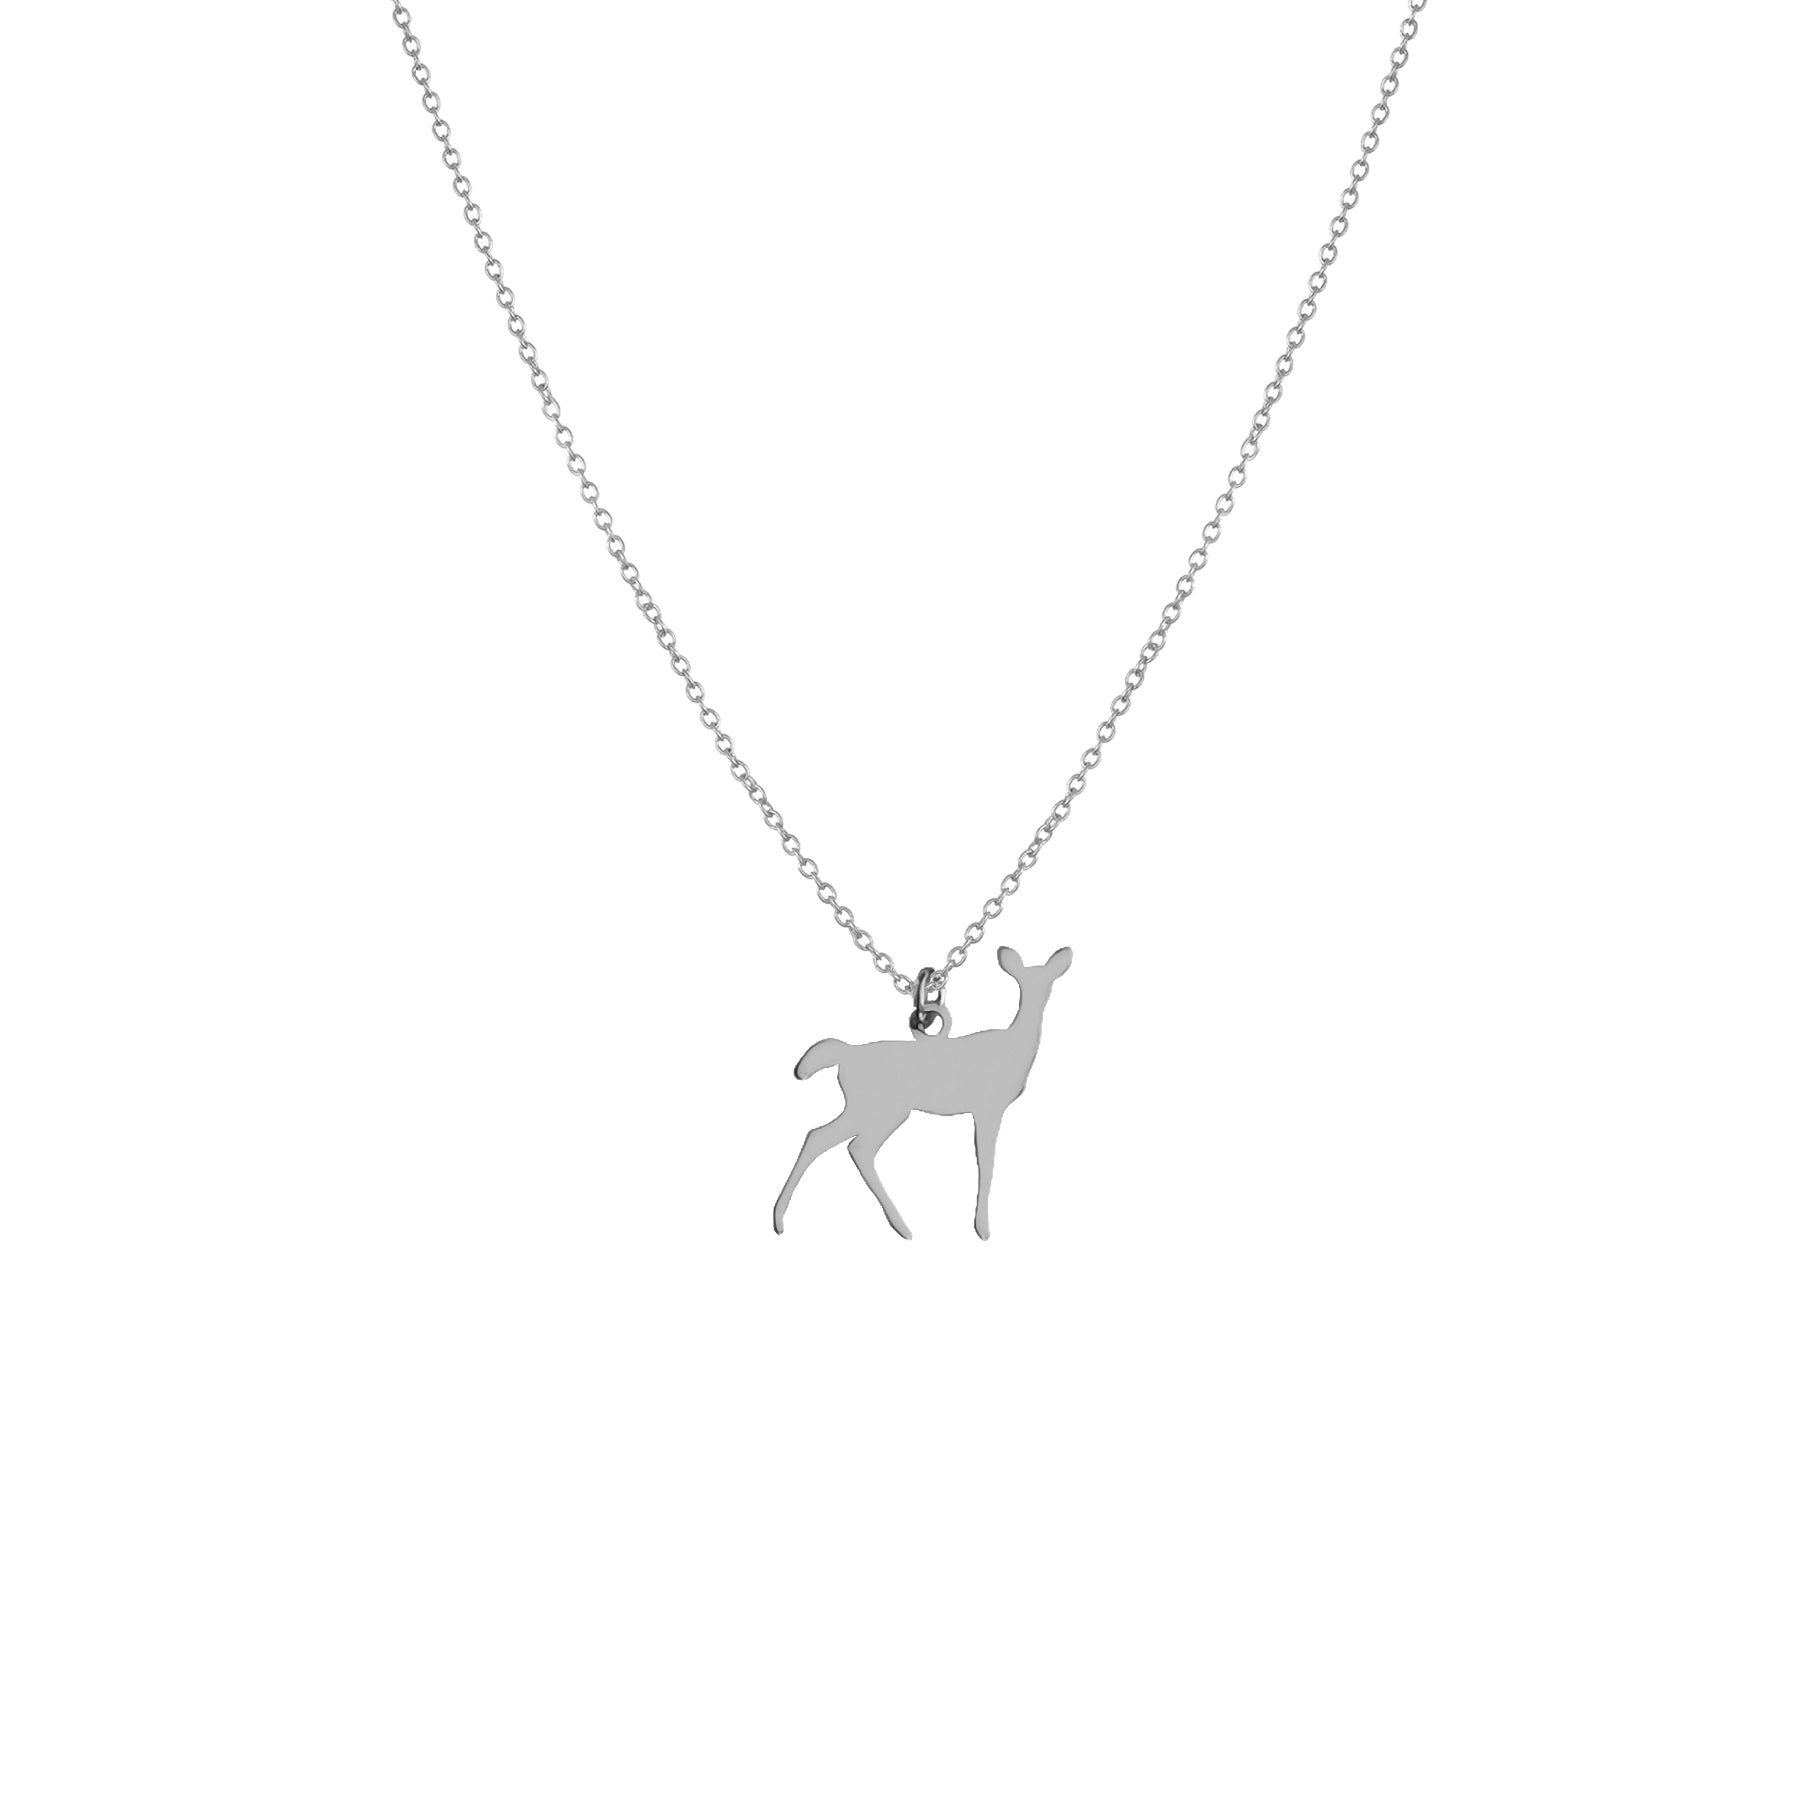 Silver small deer necklace